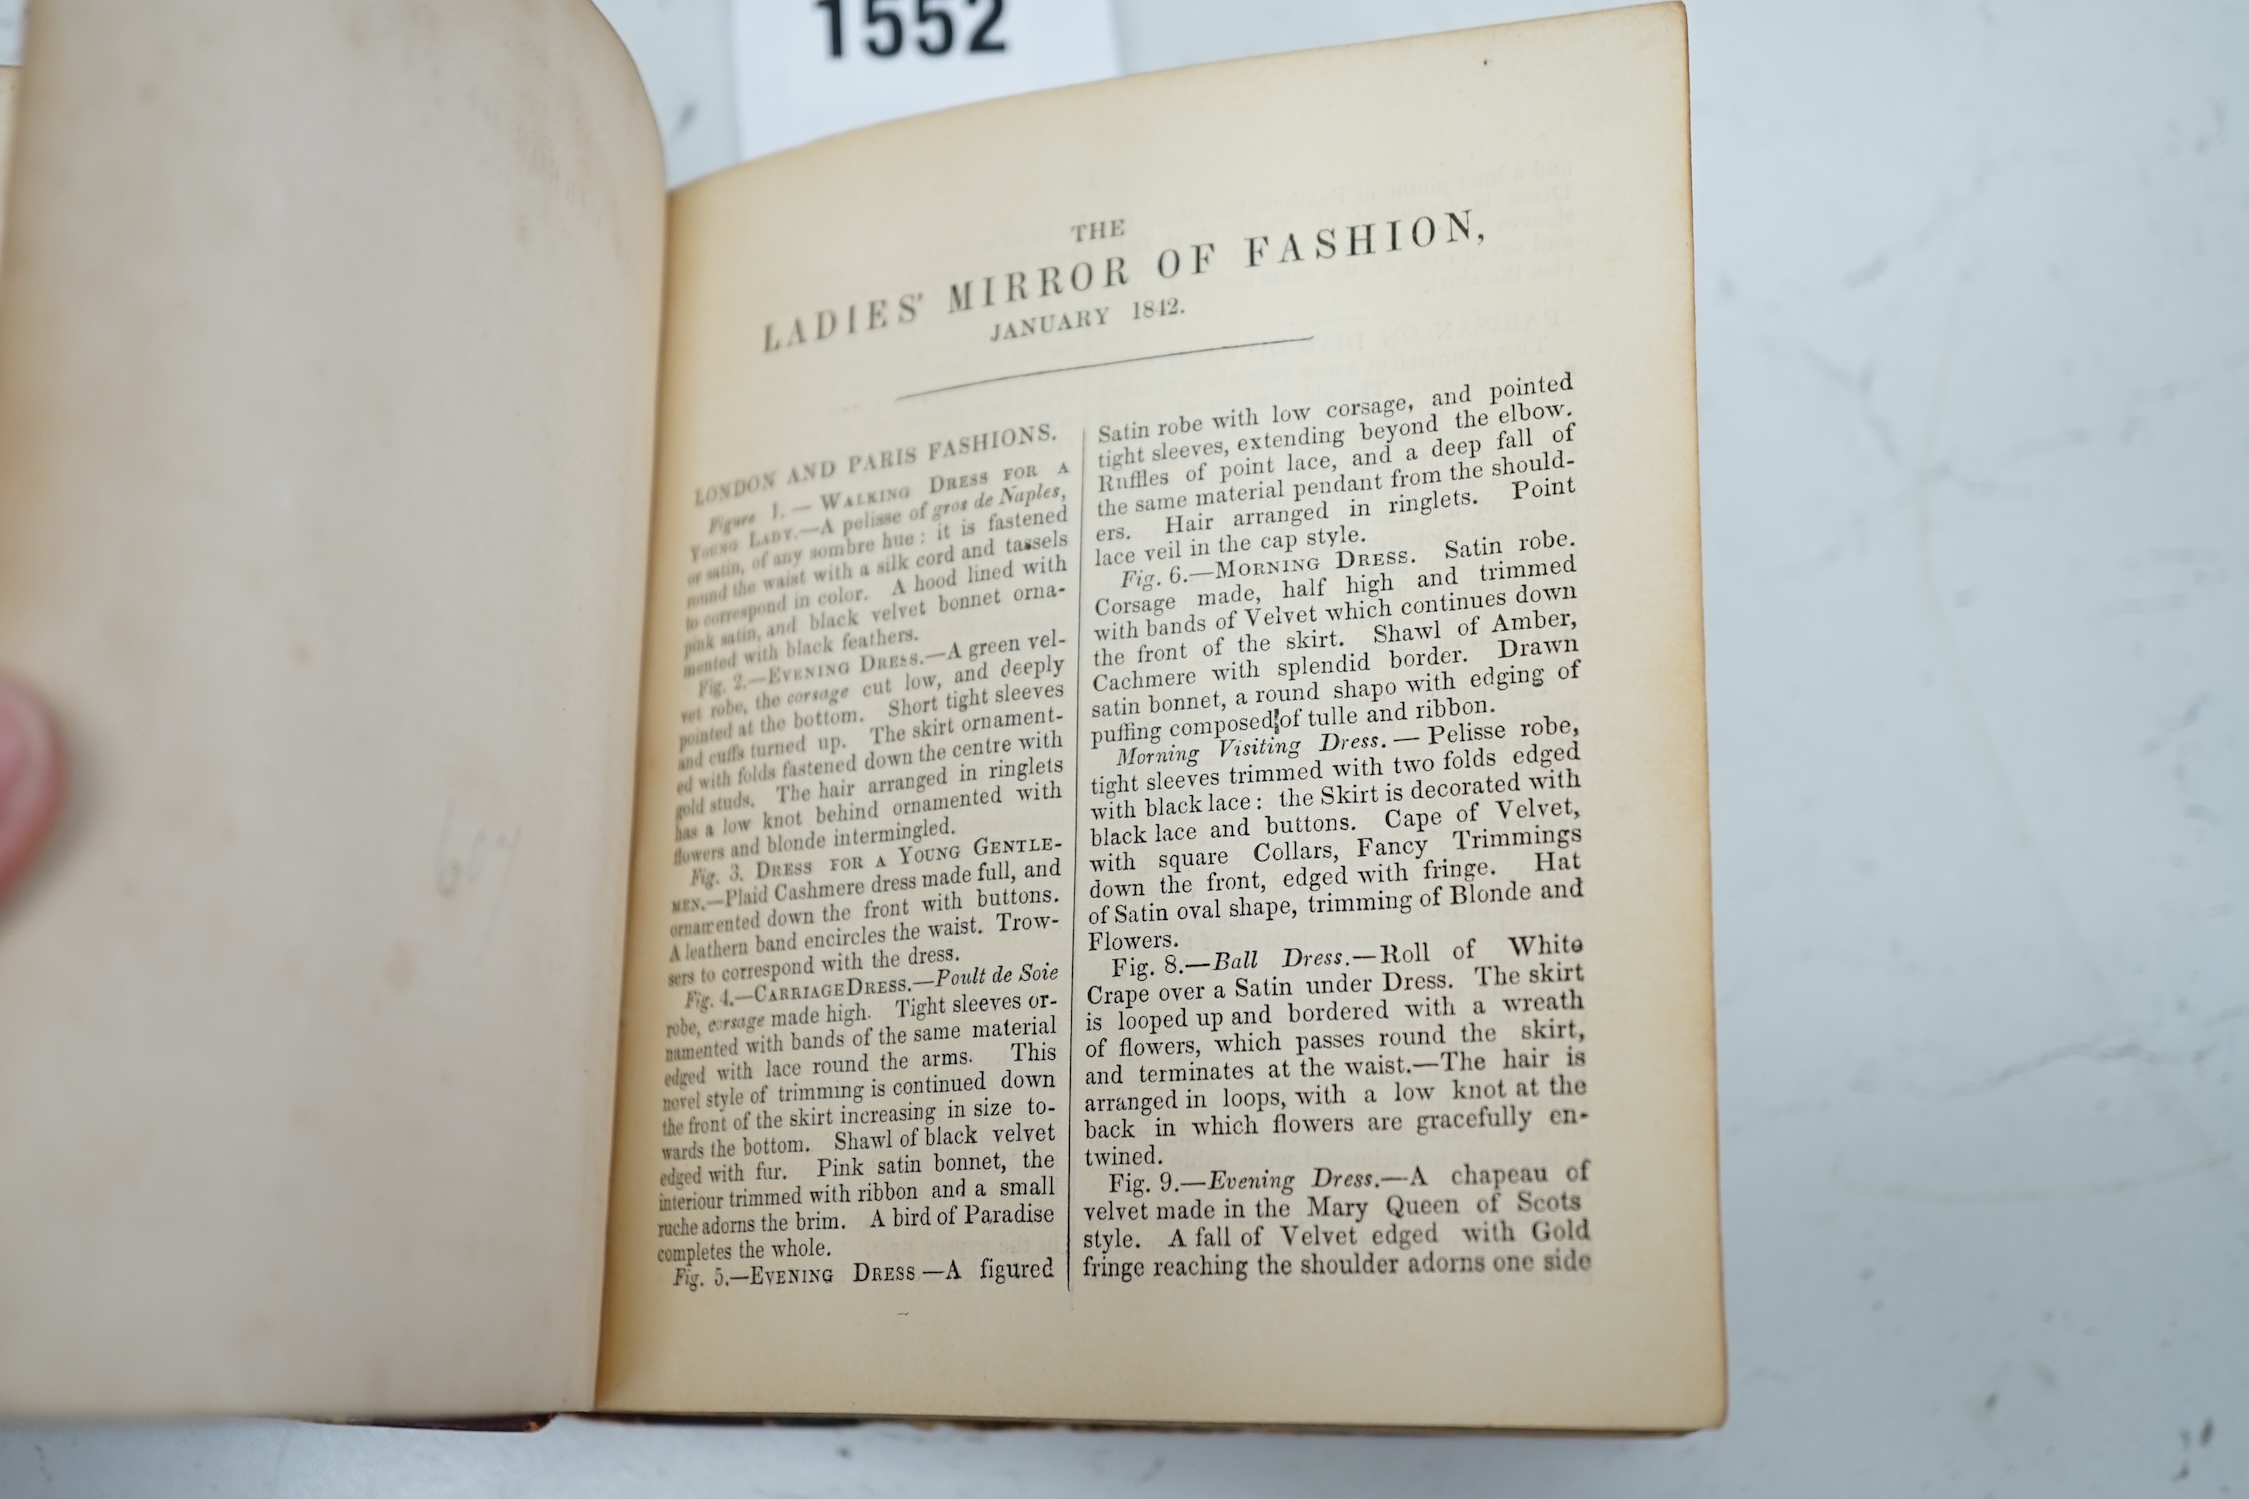 The Mirror of Fashion by Joseph Robins, London, 19th century hardback book with illustrated fashion plates. Condition - fair